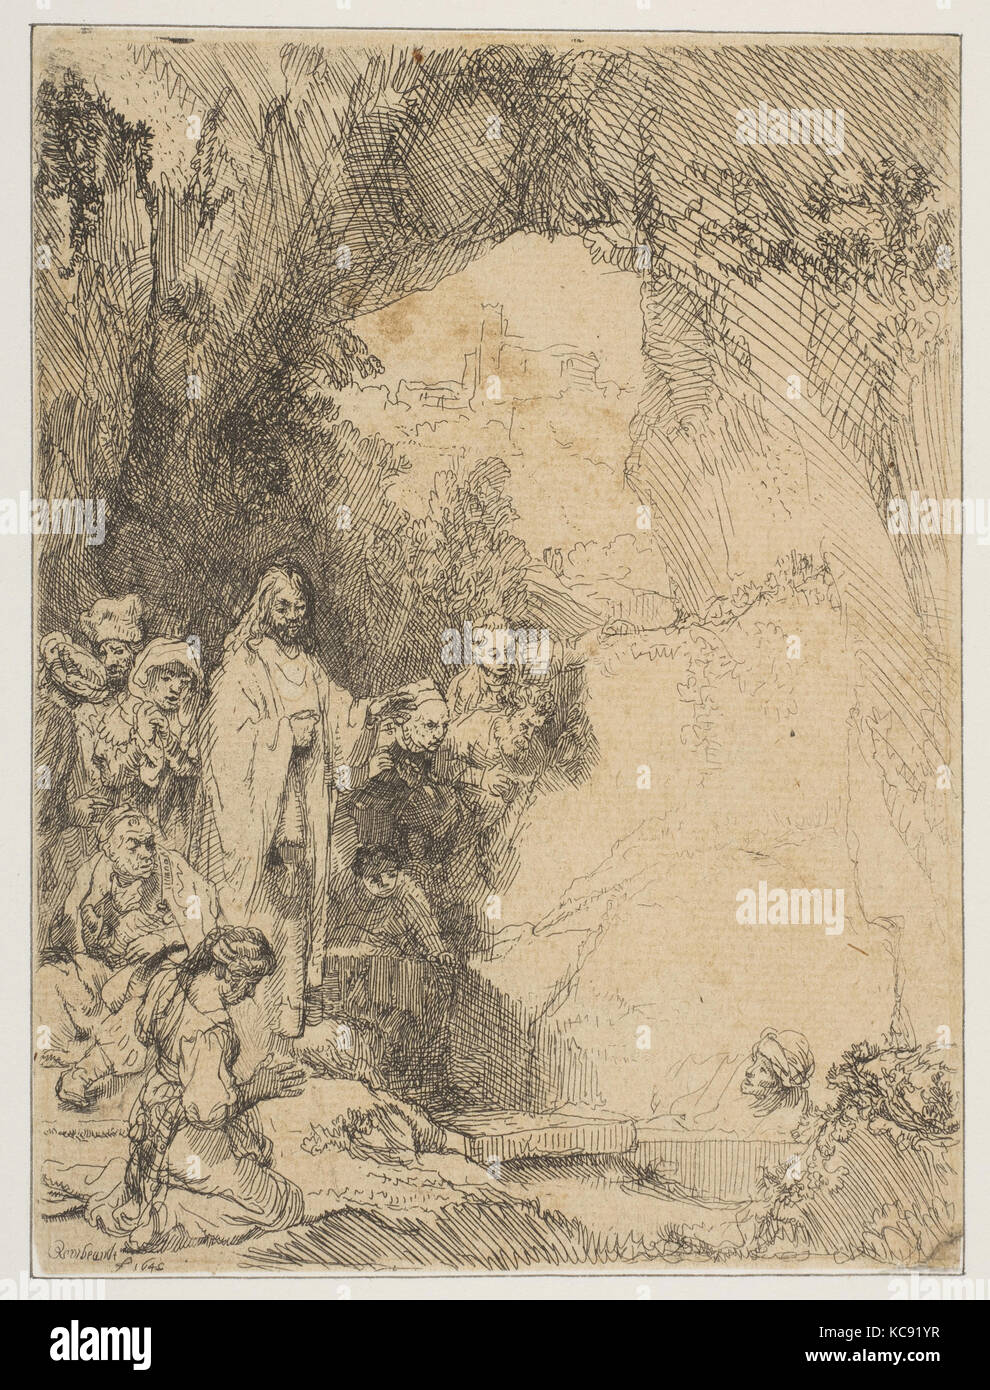 The Raising of Lazarus: The Smaller Plate, Rembrandt, 1642 Stock Photo